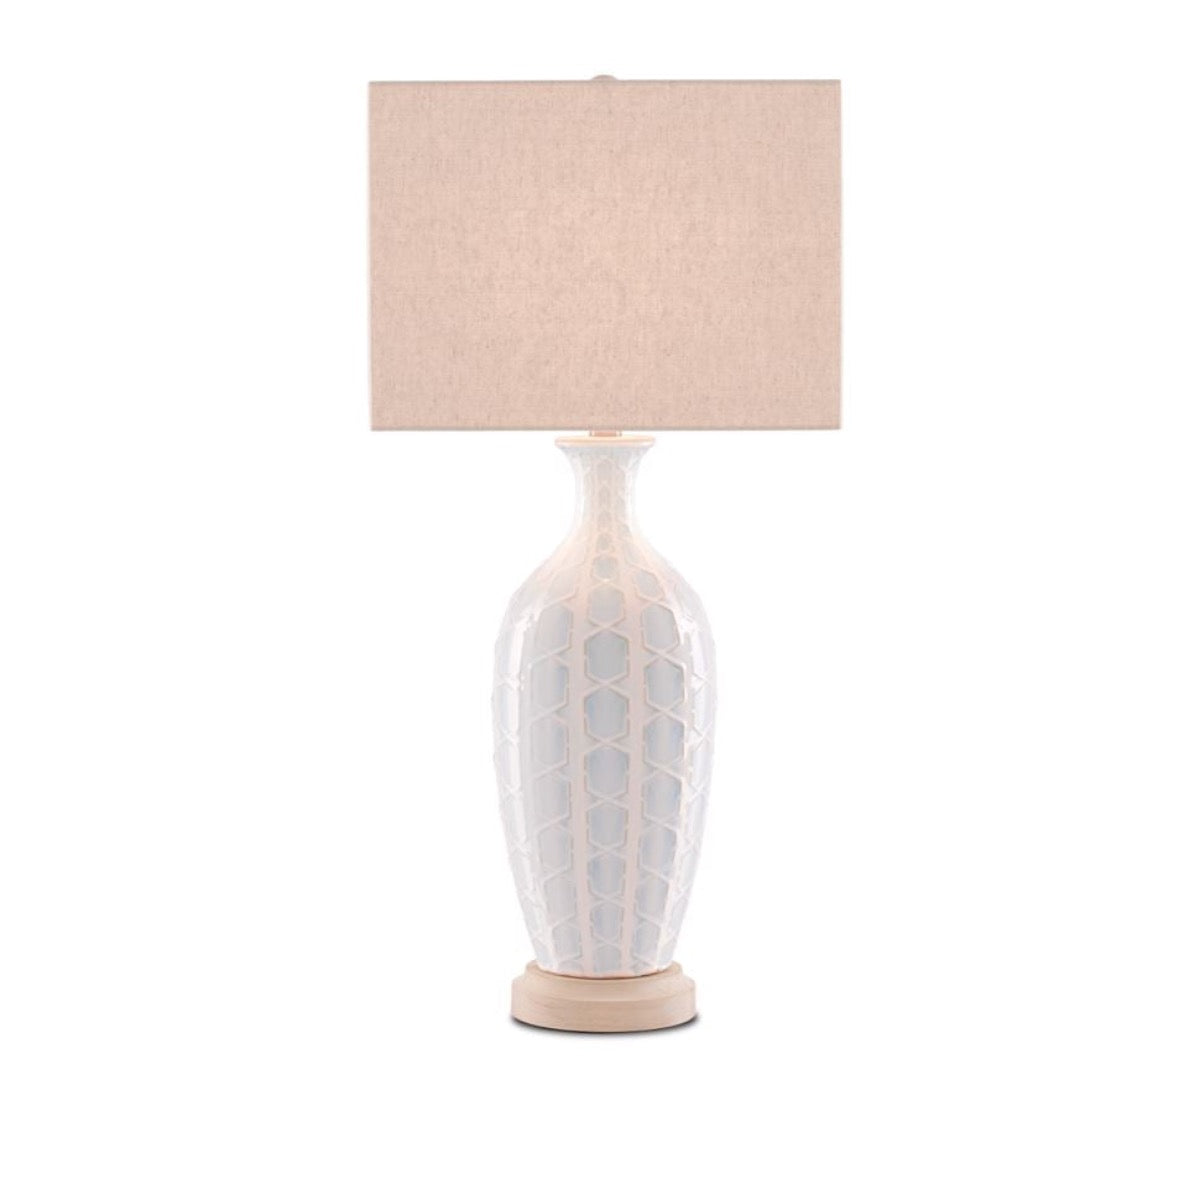 Clara Table Lamp. Light off. Front view.